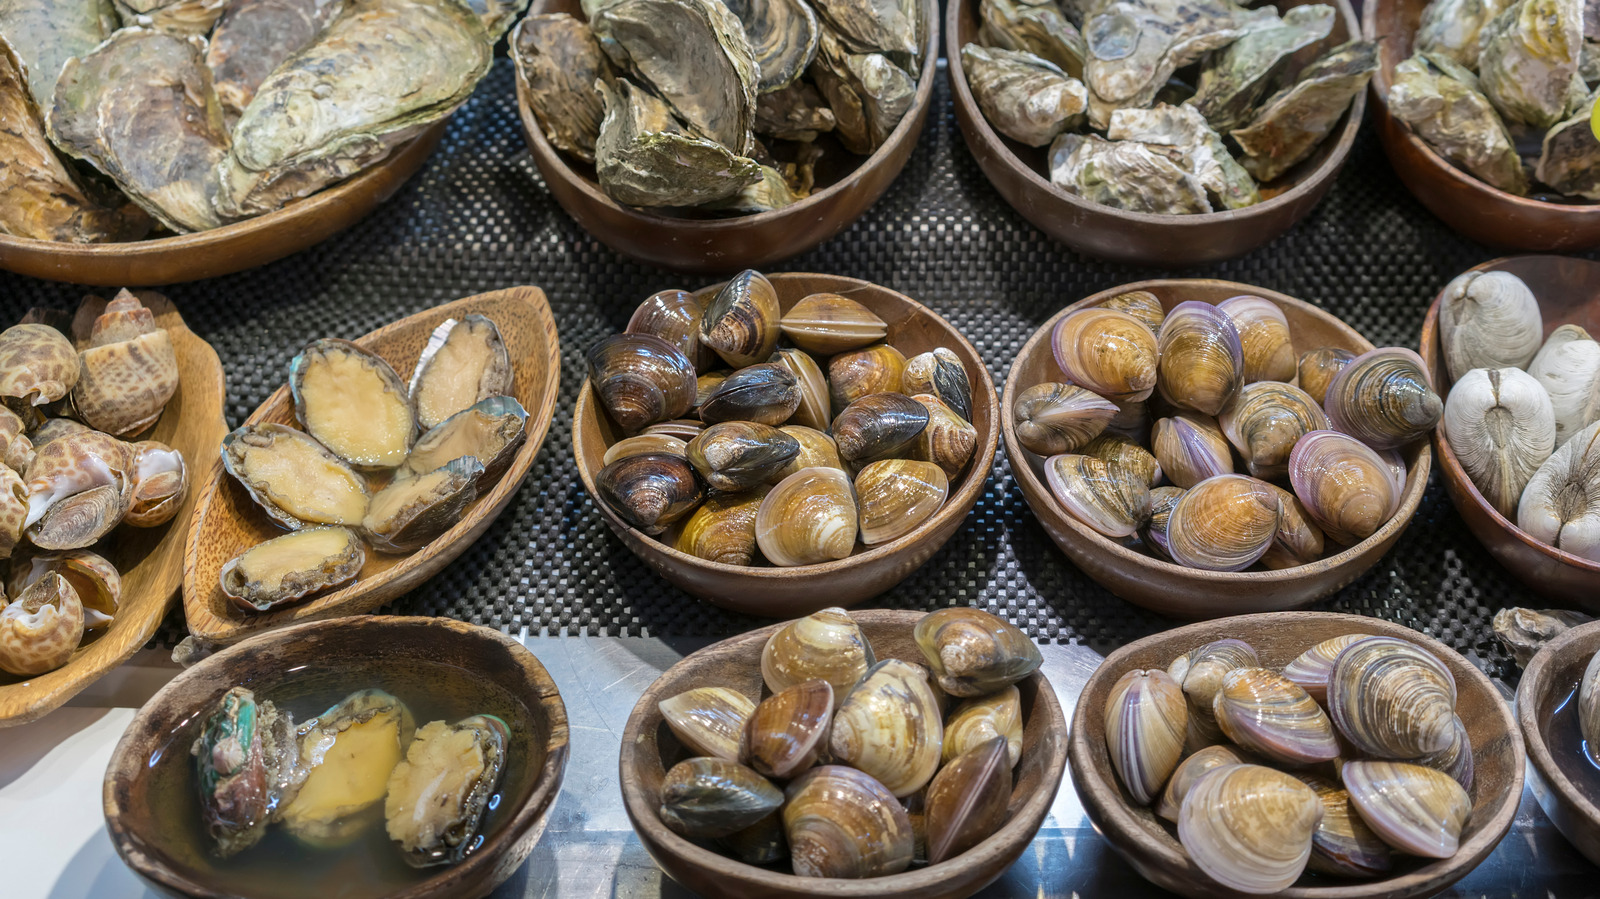 Types, Varieties, and Cooking Suggestions for Clams